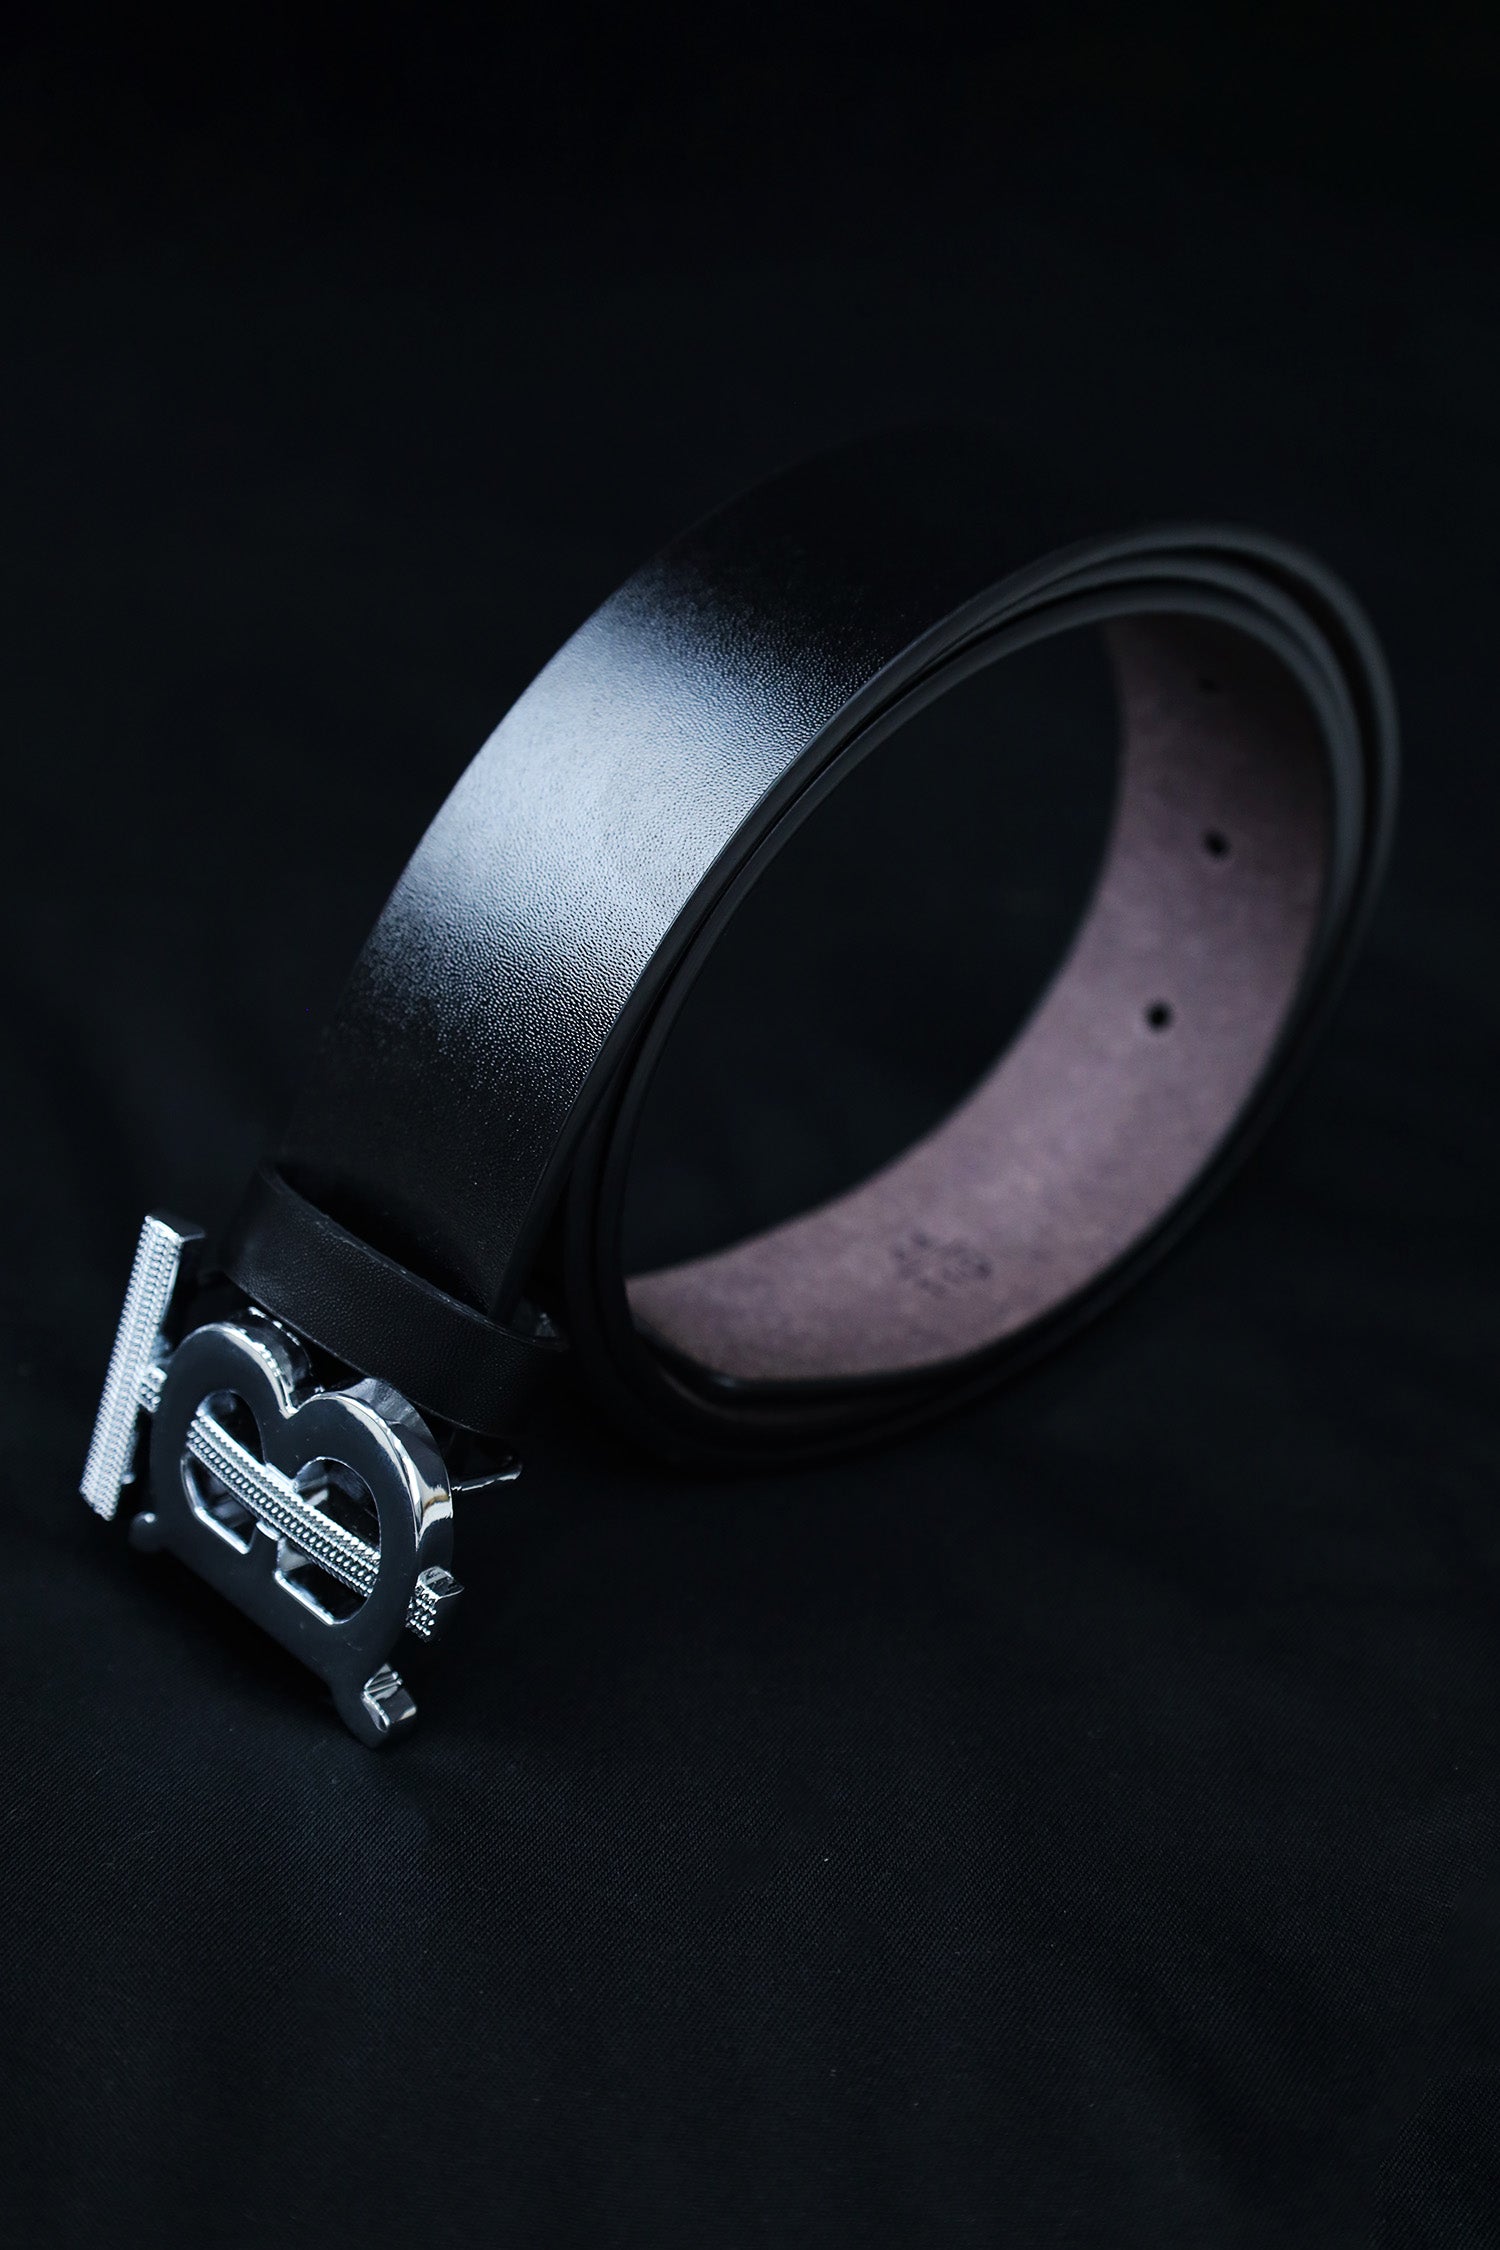 Burbrry Metal Alloy Automatic Buckle Branded Belt